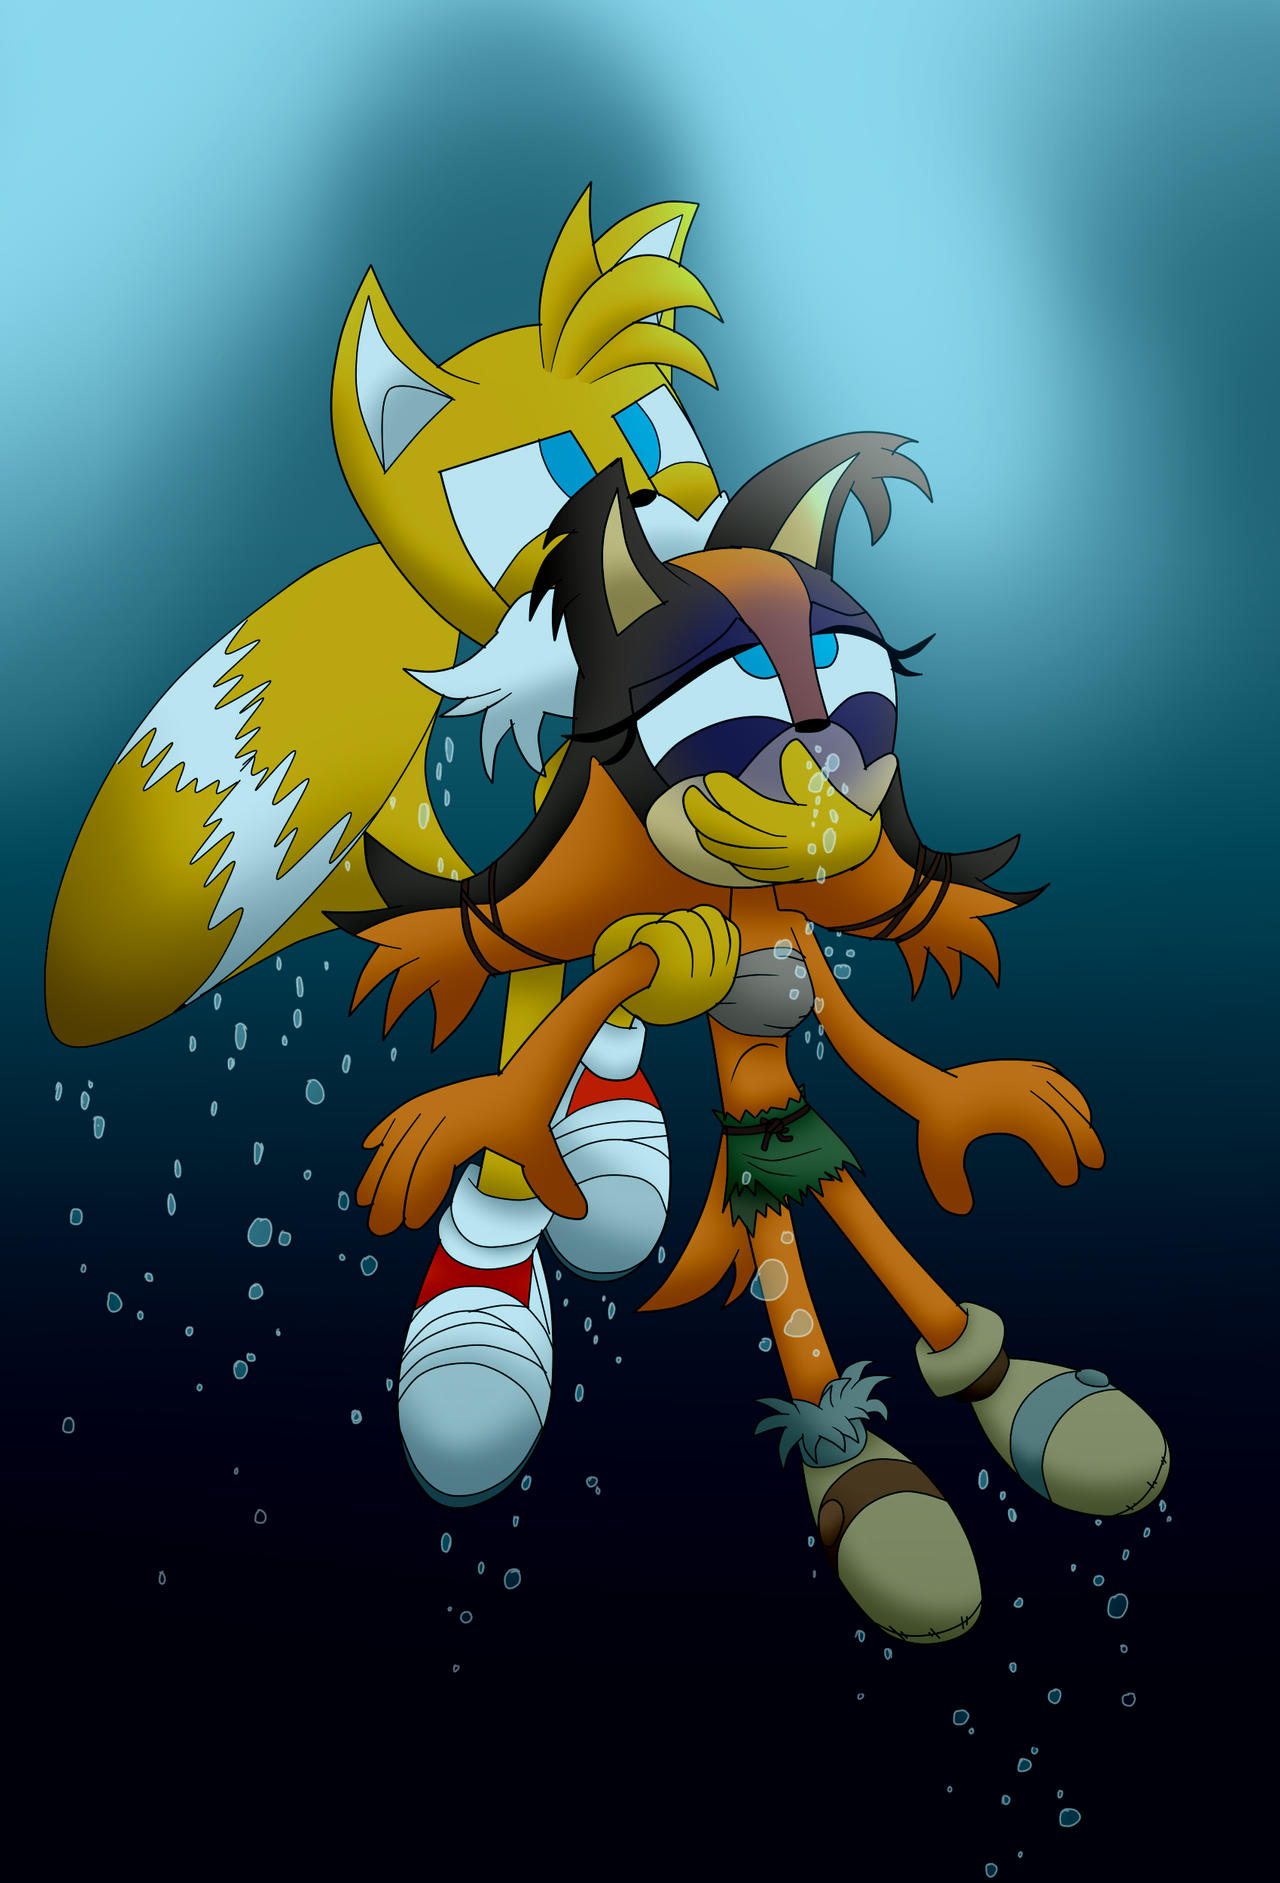 Tails to the rescue